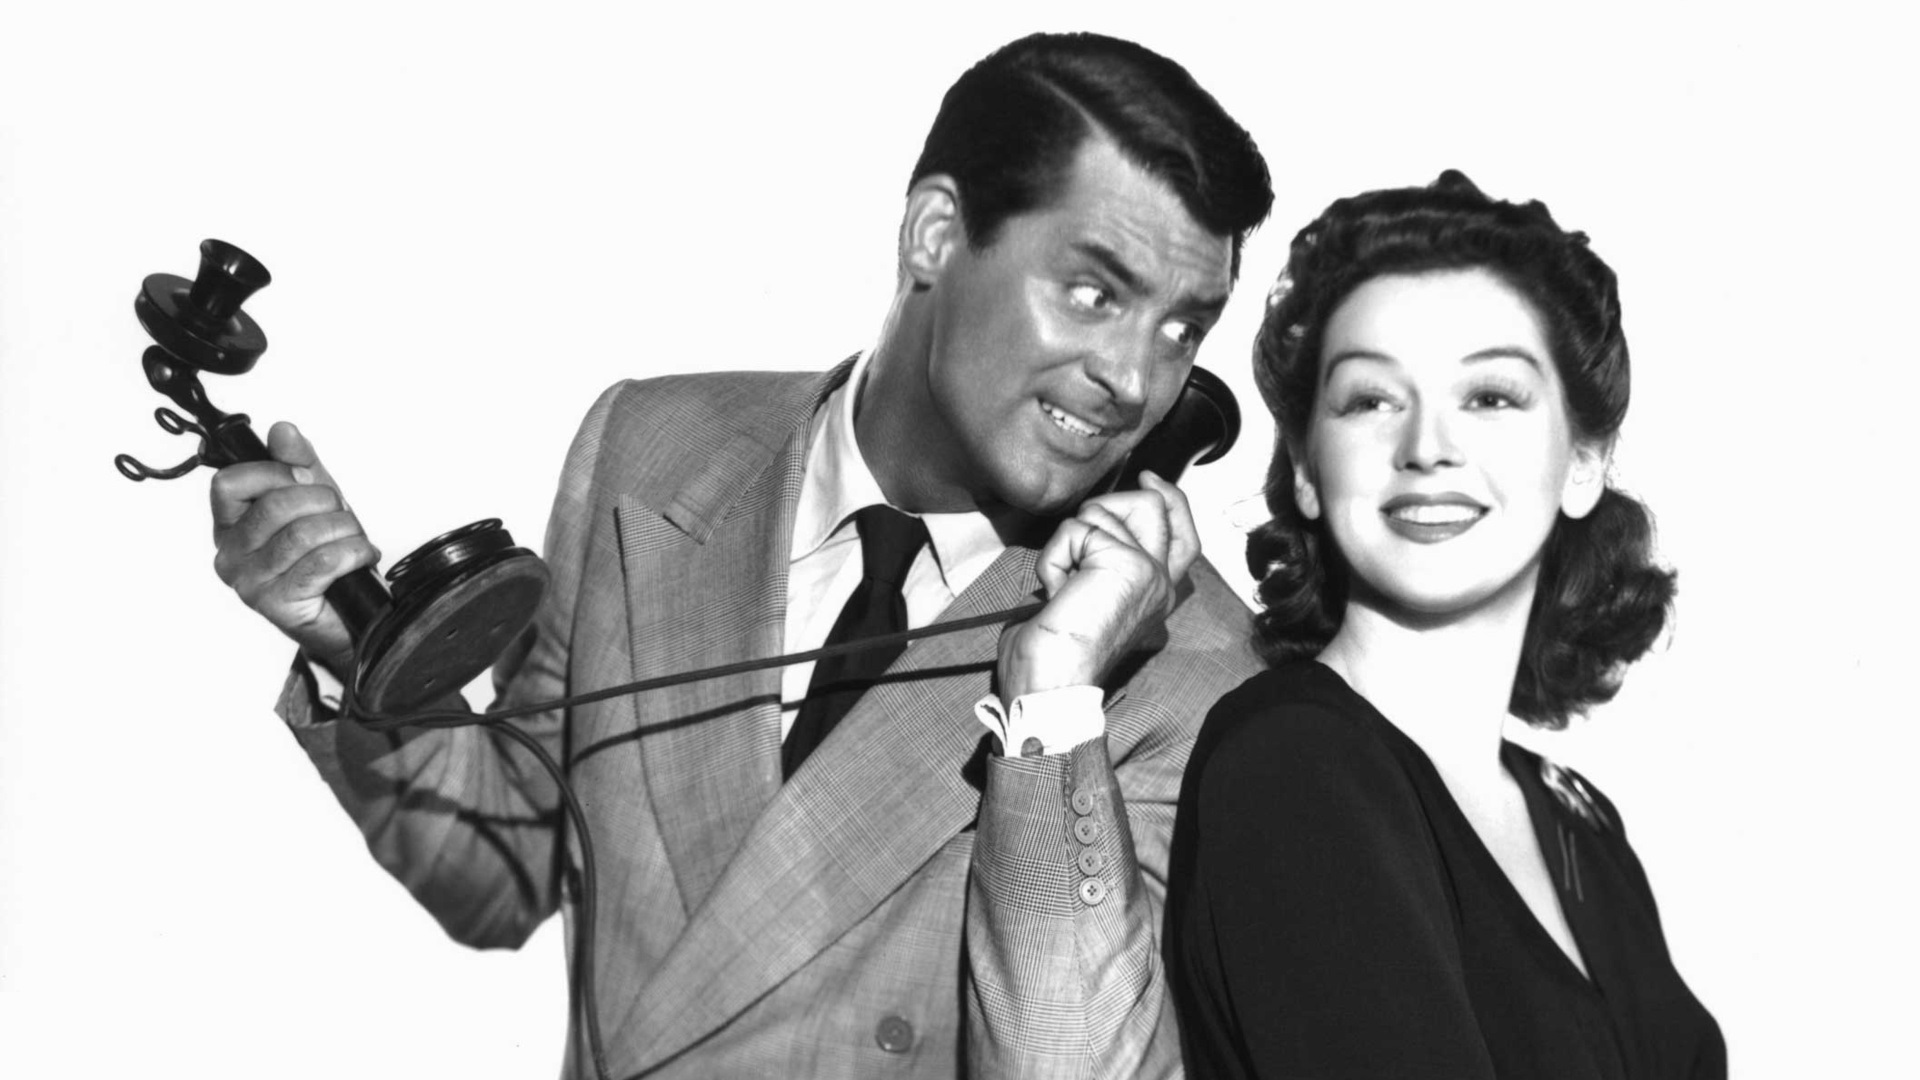 Movie His Girl Friday HD Wallpaper | Background Image